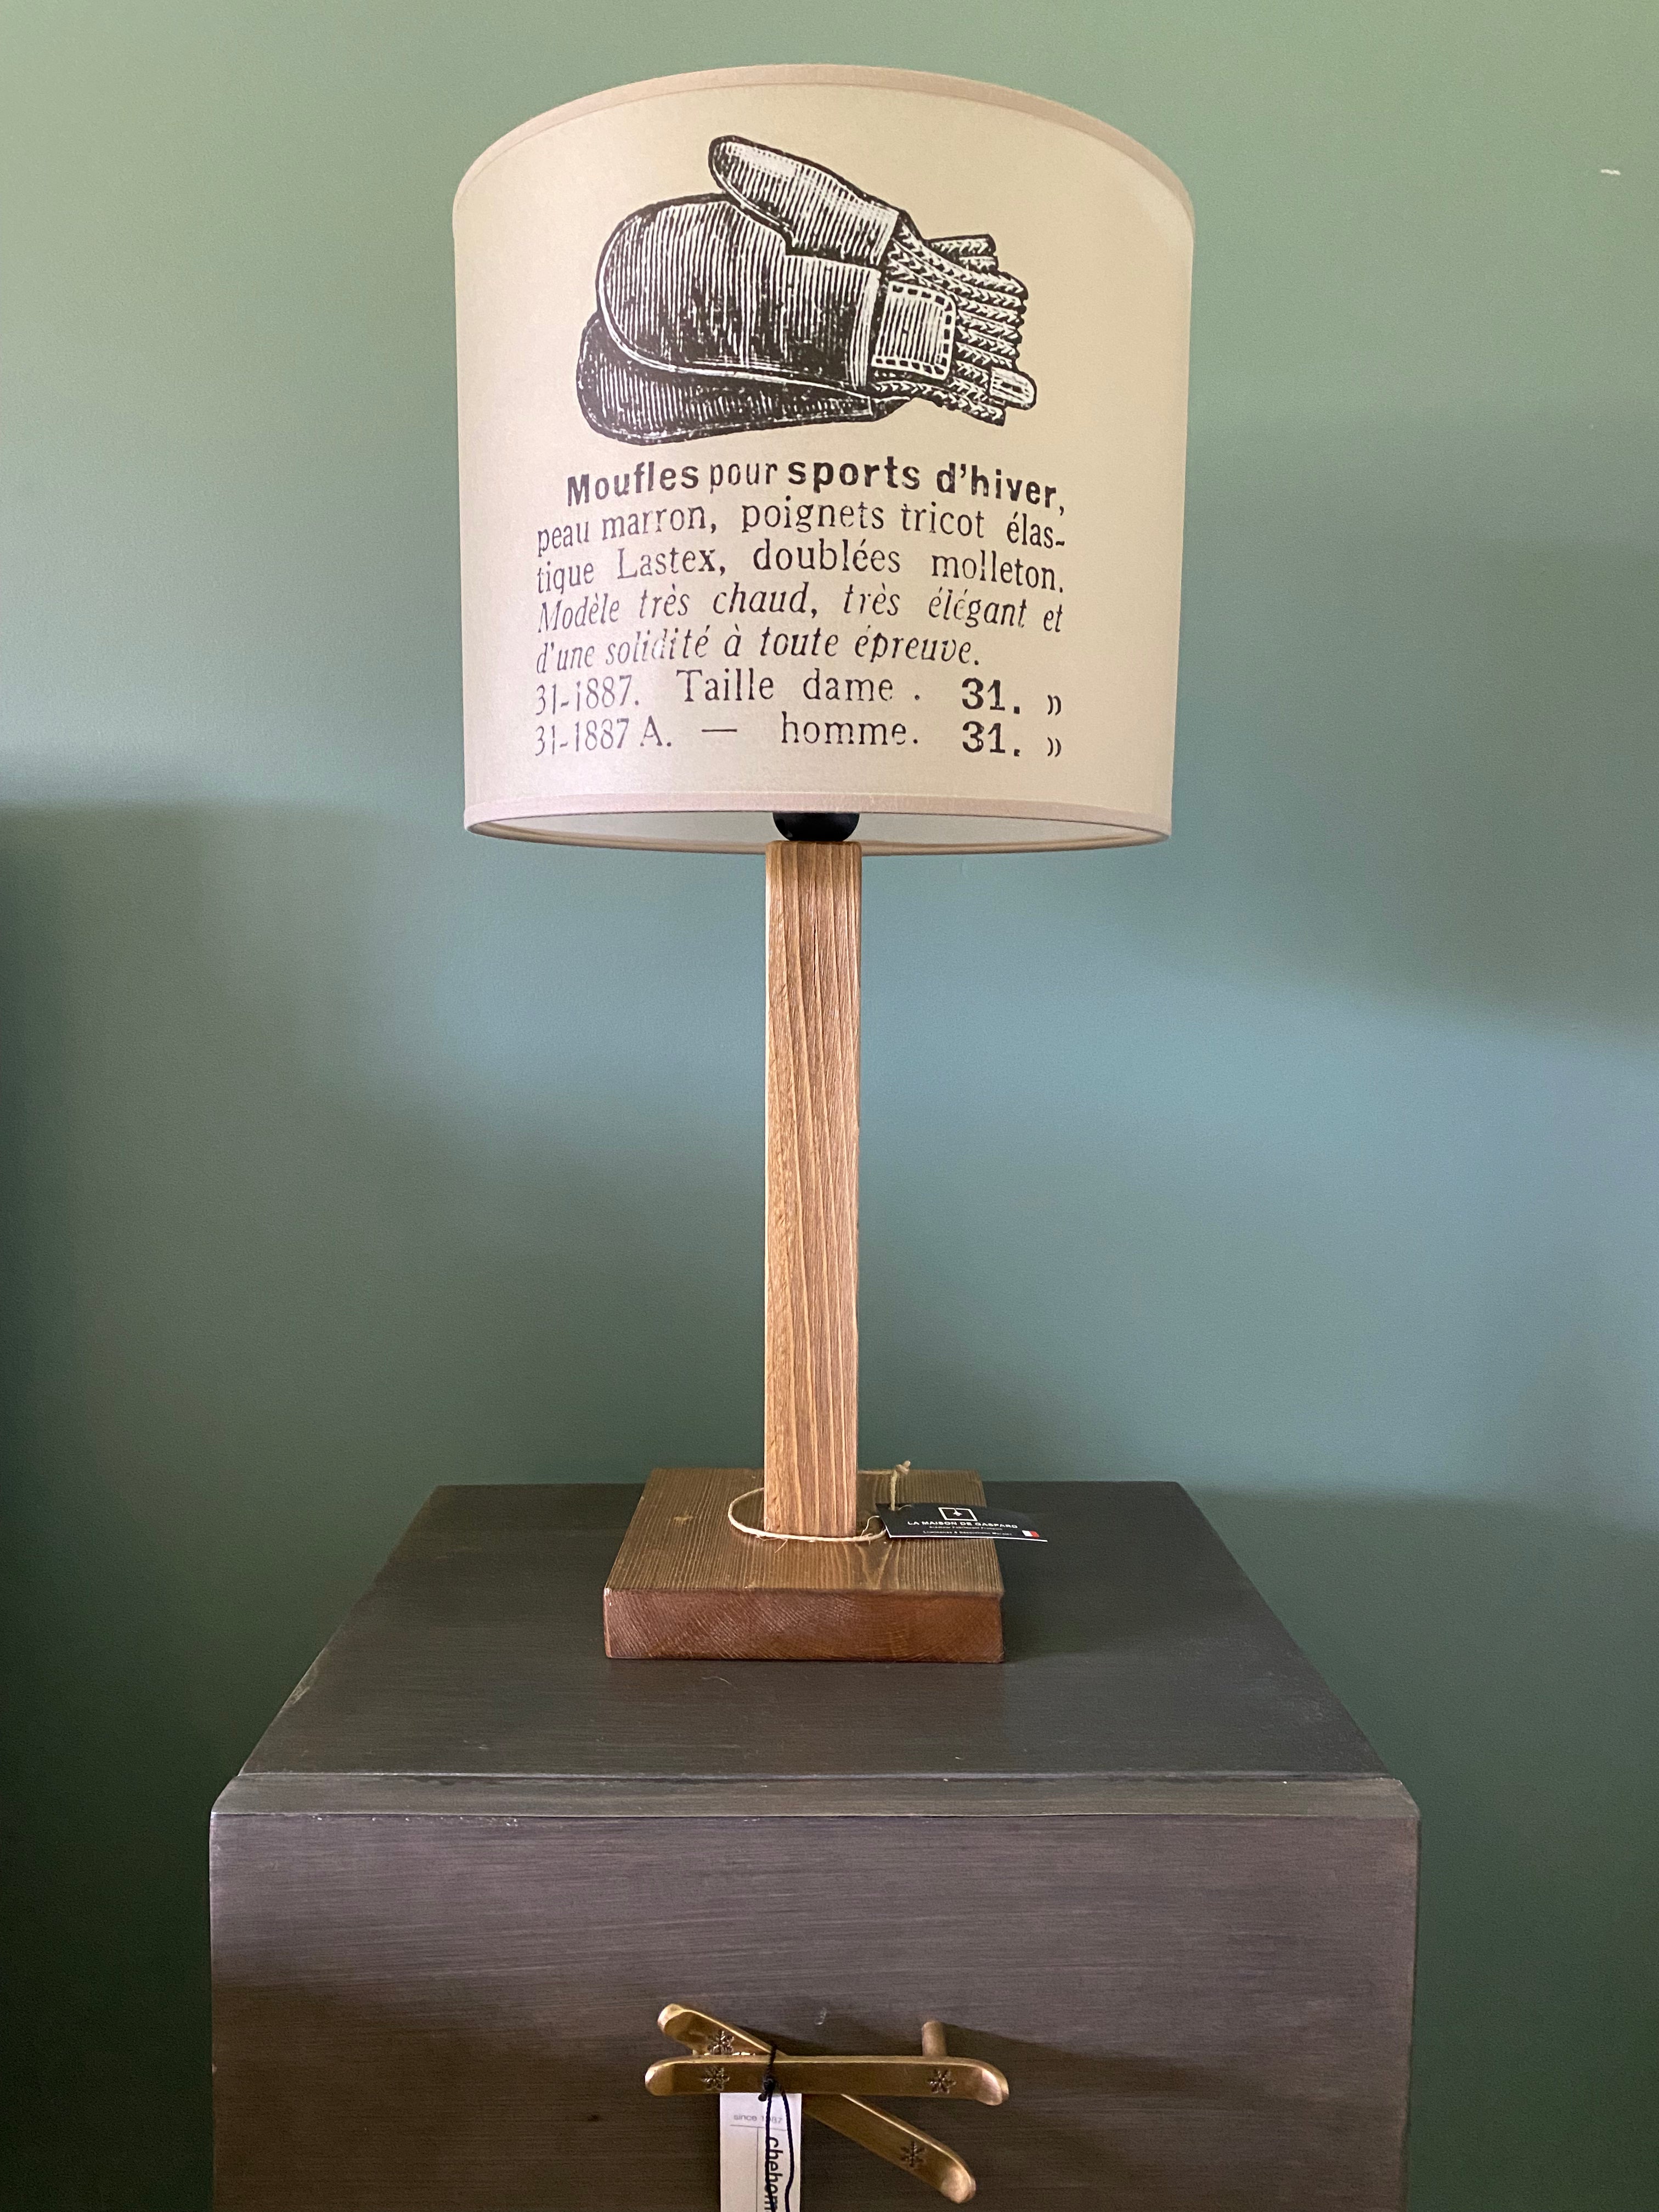 Lamp with a square solid wooden base and square stem holding up the canvas printed beige lamp shade. The beige shade shows a vintage black & white drawing of a pair of woollen mittens and description in french of the mittens. On a wooden table with brass ski handles against a green wall.